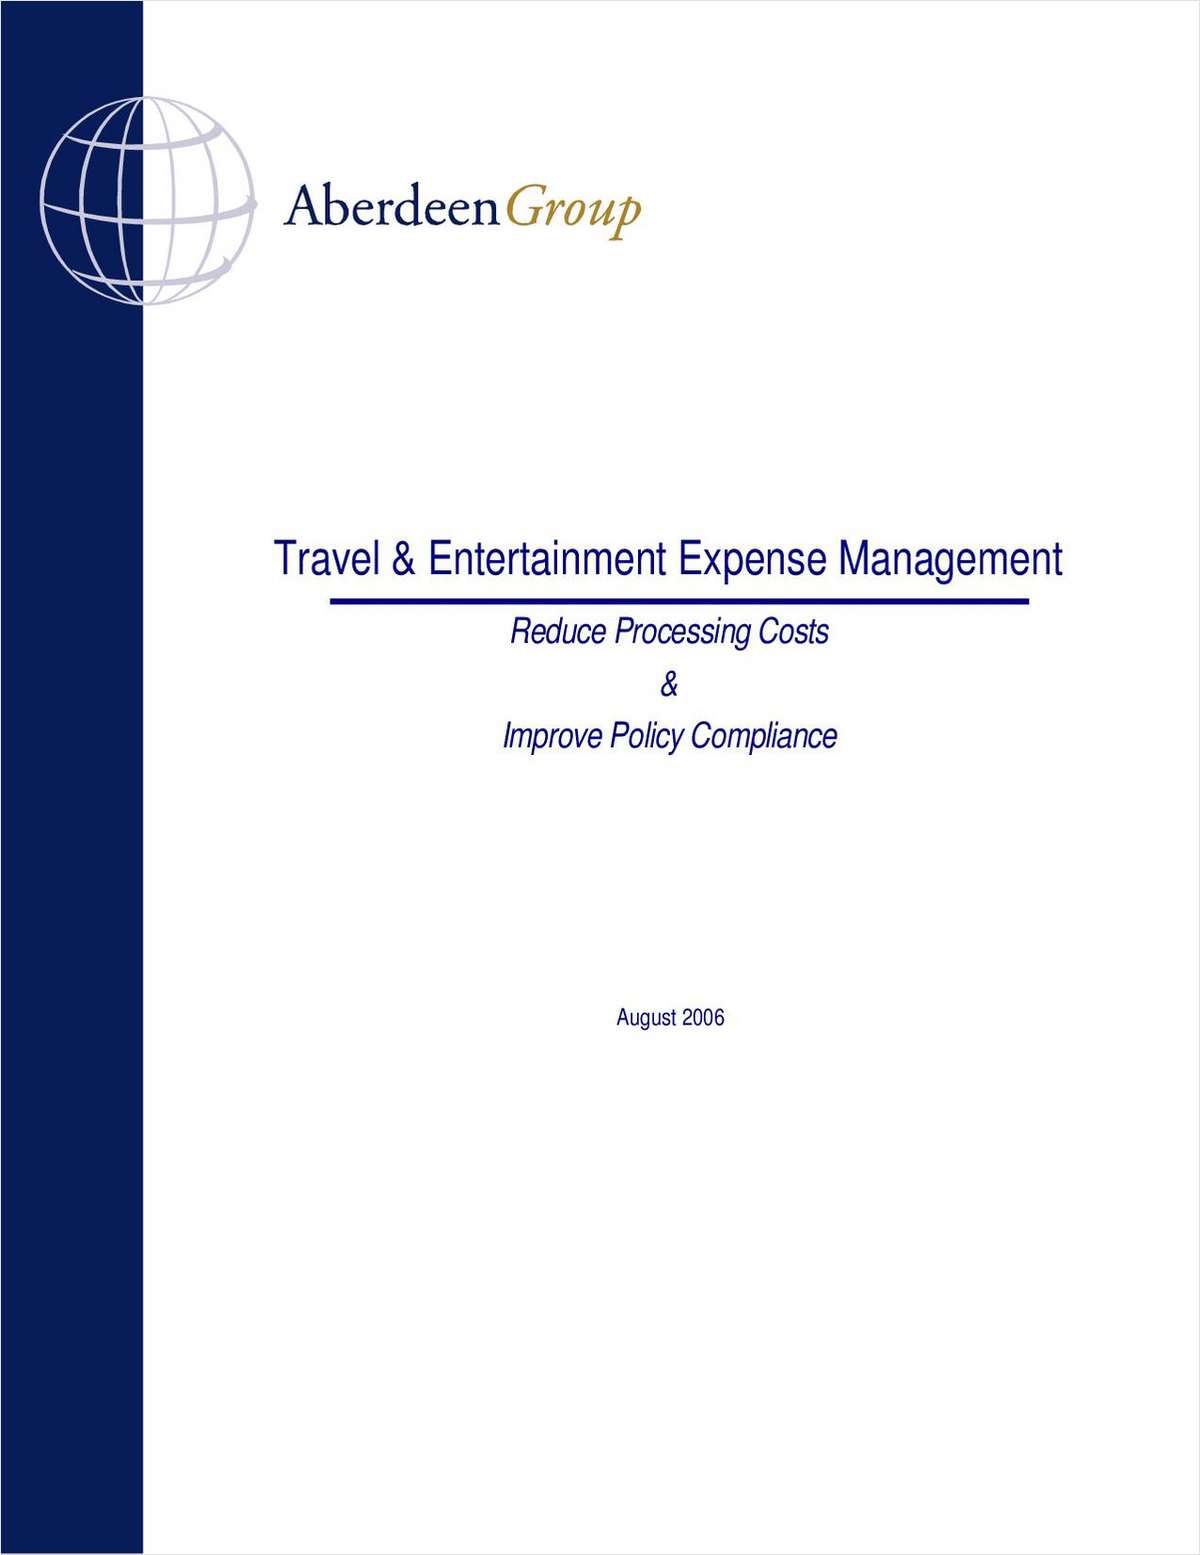 Reduce Travel & Expense Processing Costs & Improve Policy Compliance